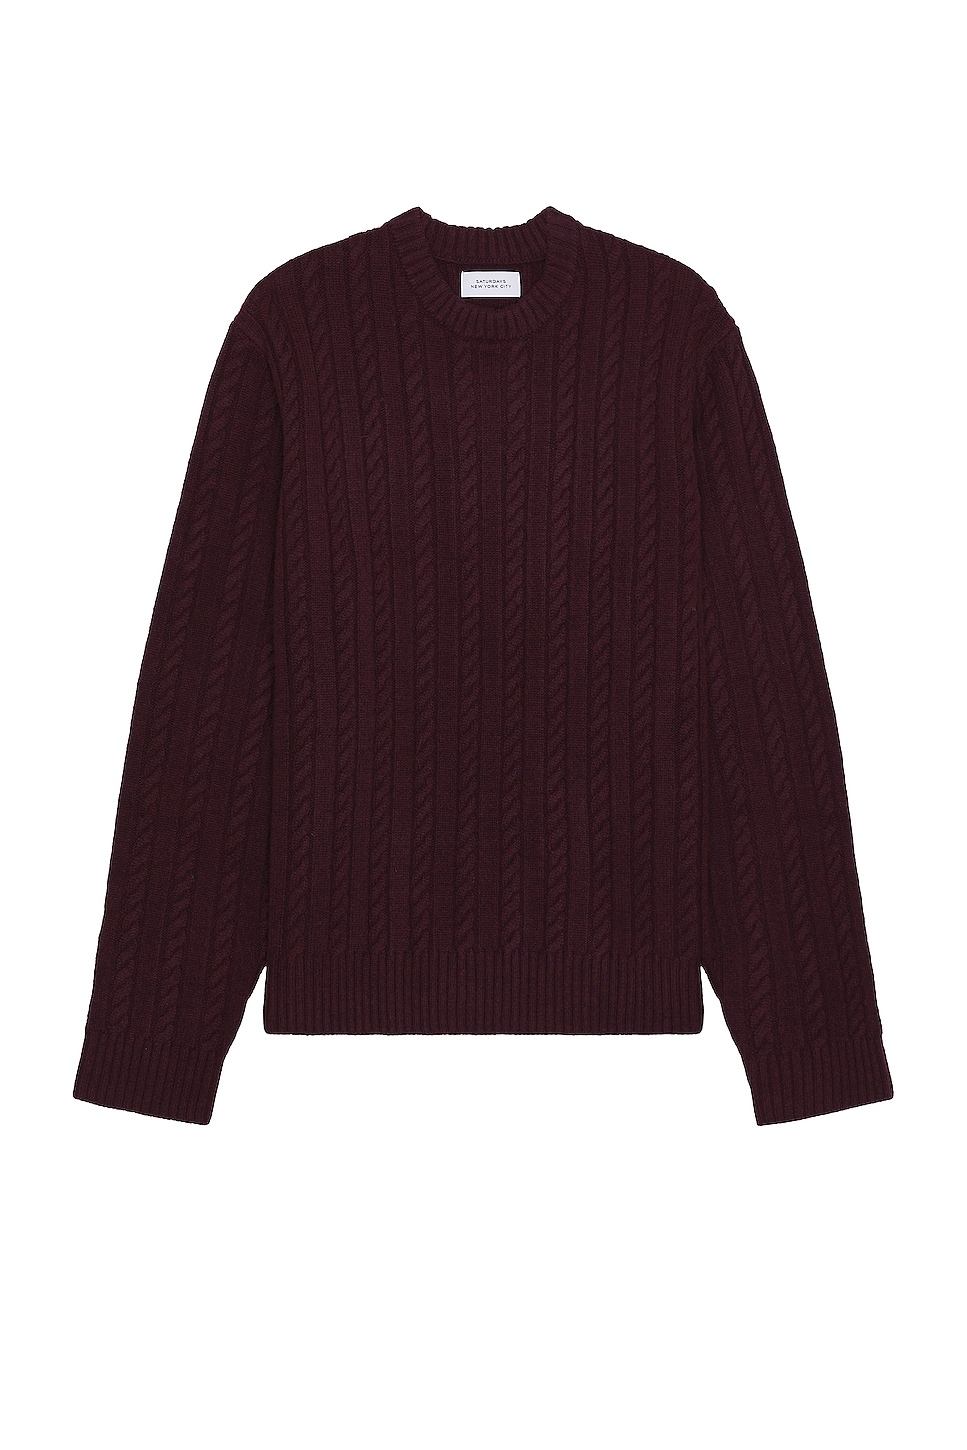 Nico Cable Knit Sweater in Burgundy